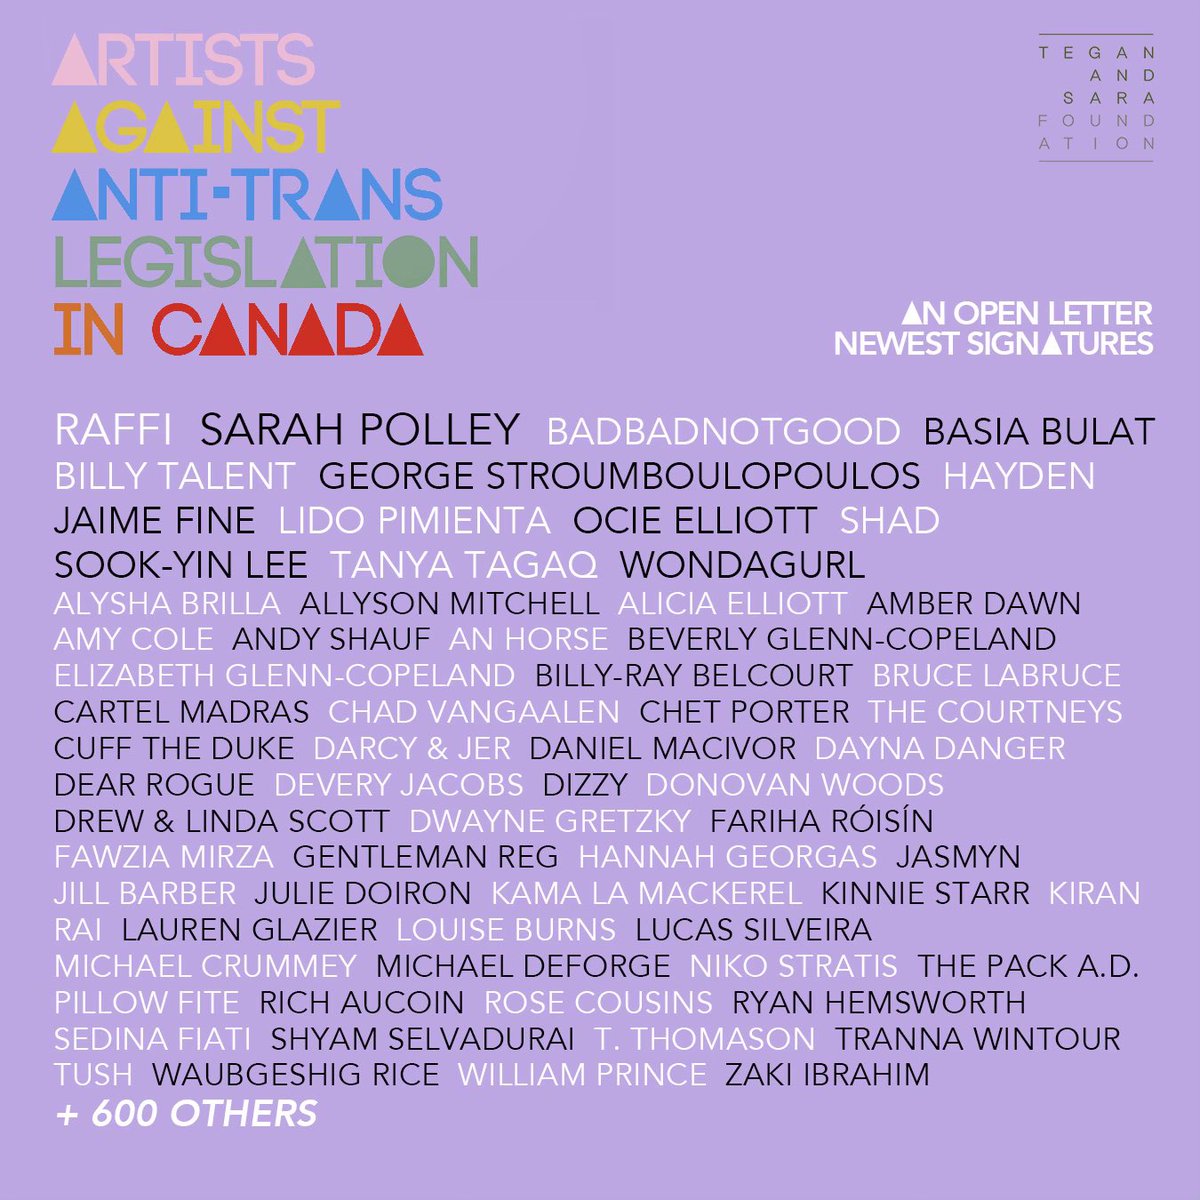 More than 200 additional artists living in and hailing from Canada have signed onto our Open Letter: Artists Against Anti-Trans Legislation, bringing us to more than 600 standing in solidarity against this concerning rise in discriminatory proposed policy. teganandsarafoundation.org/open-letter